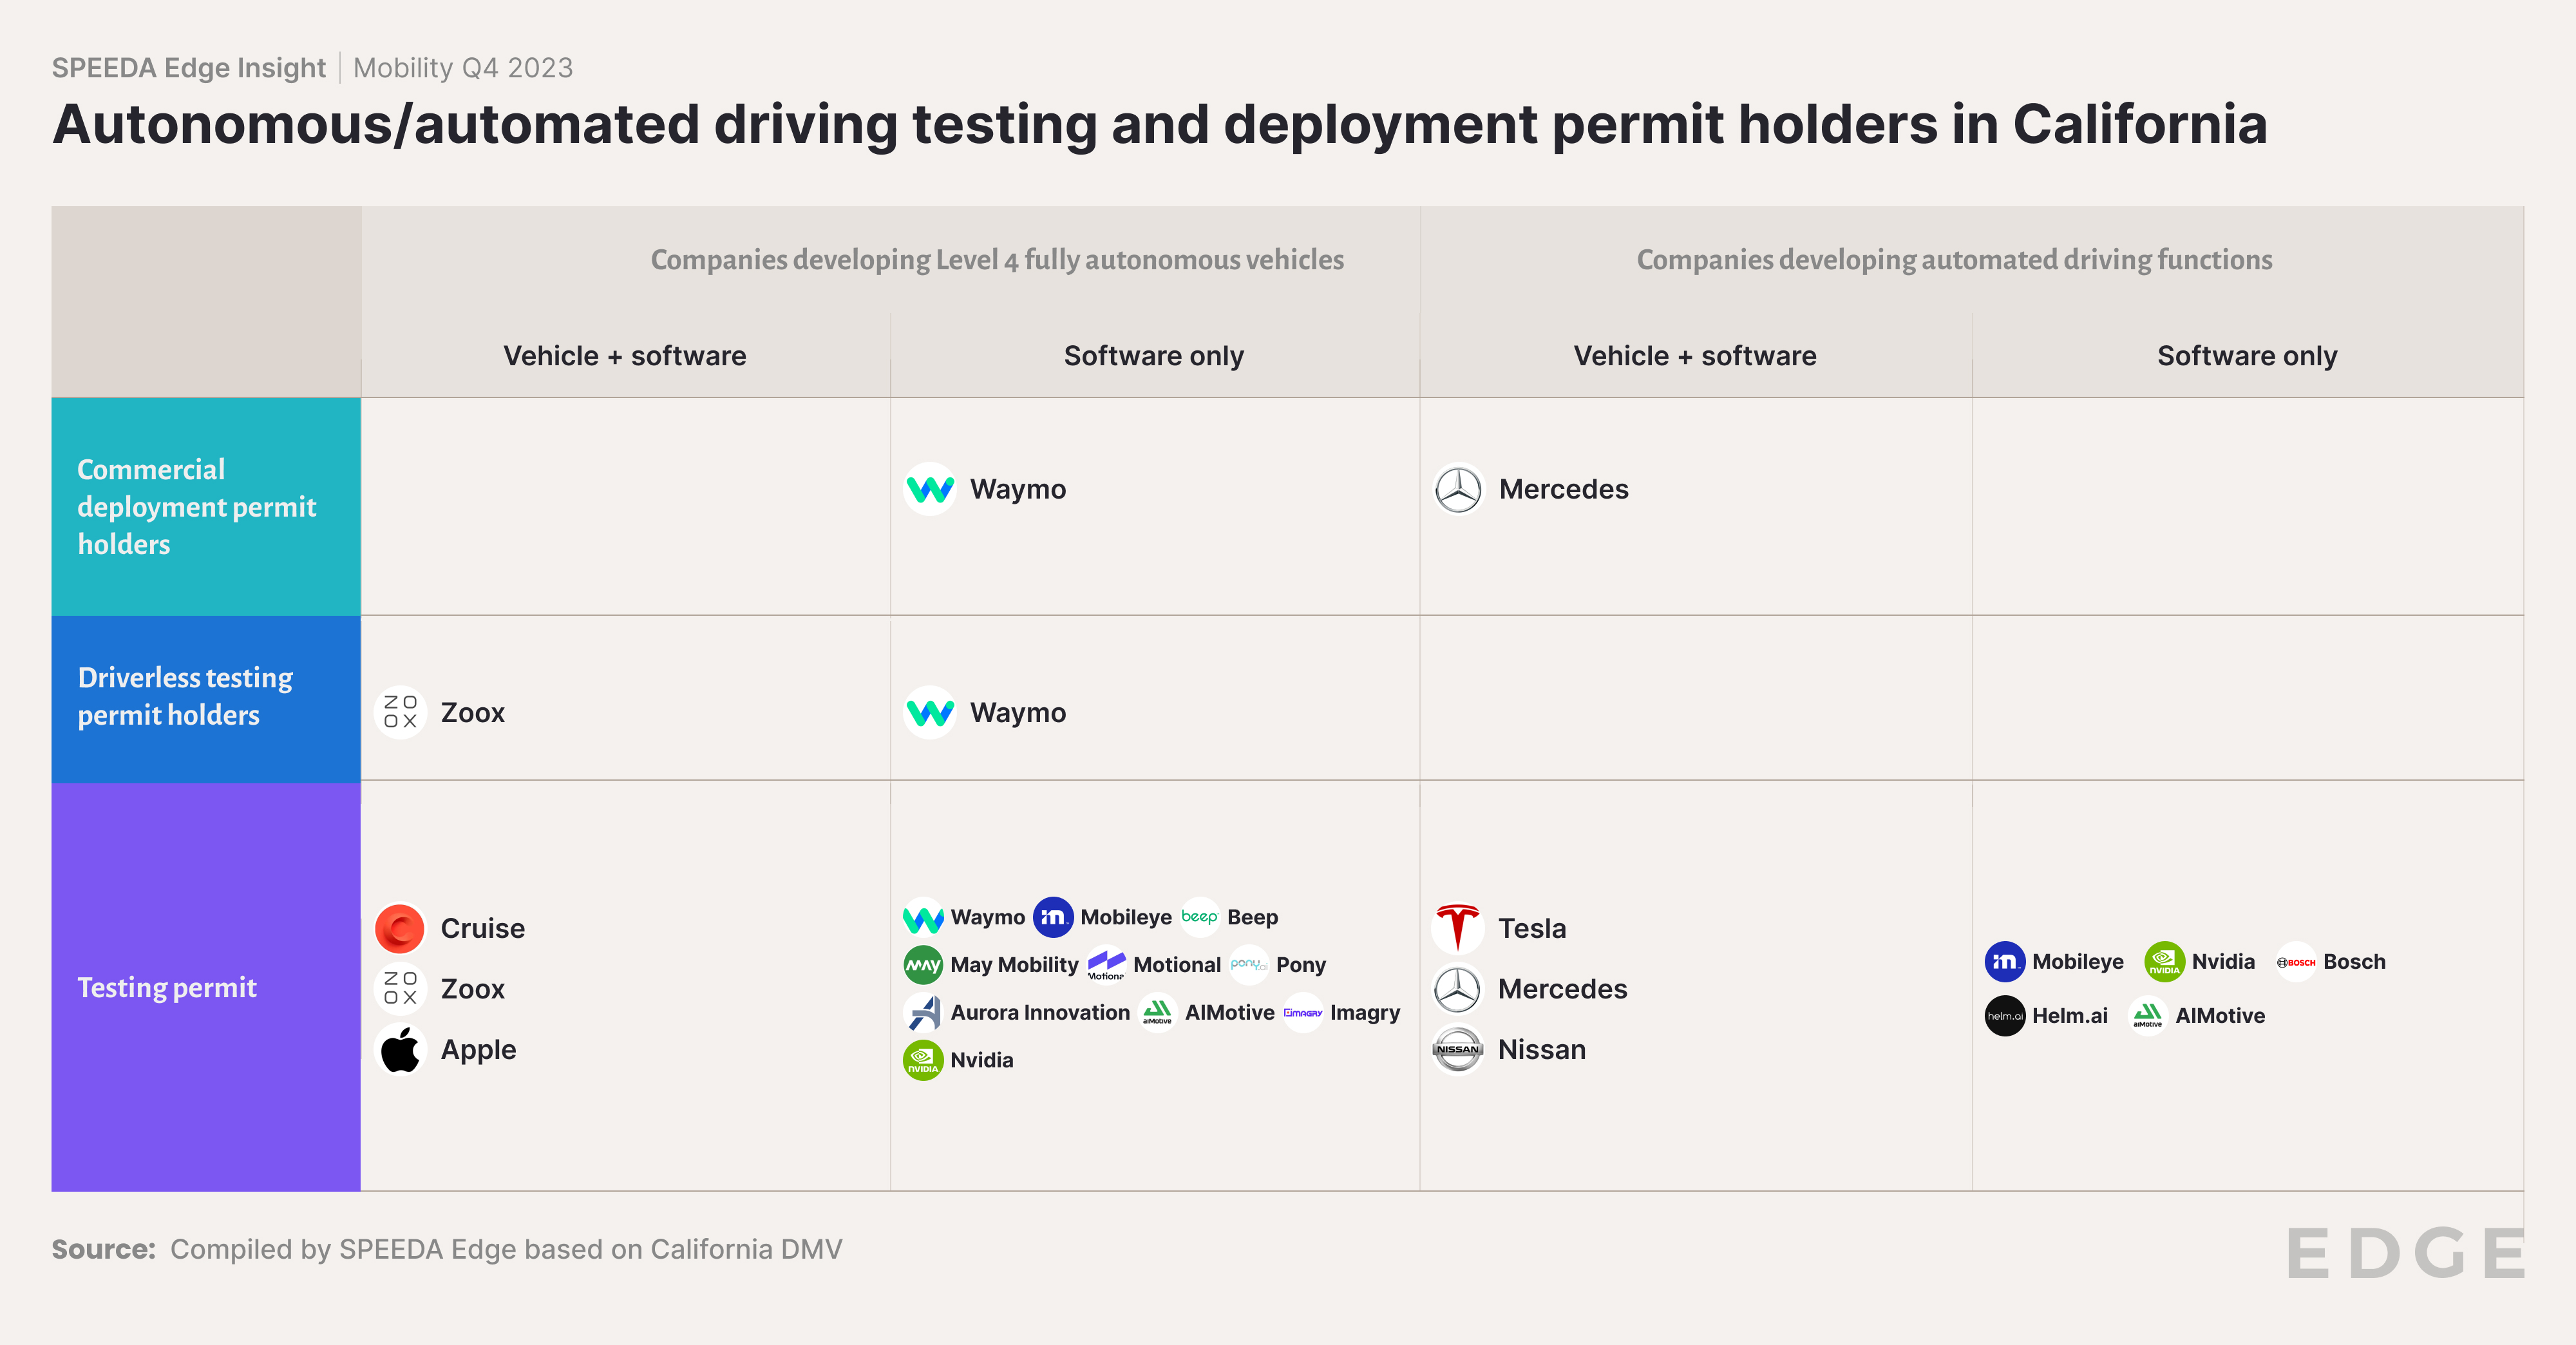 Autonomous/automated driving testing and deployment permit holders in California